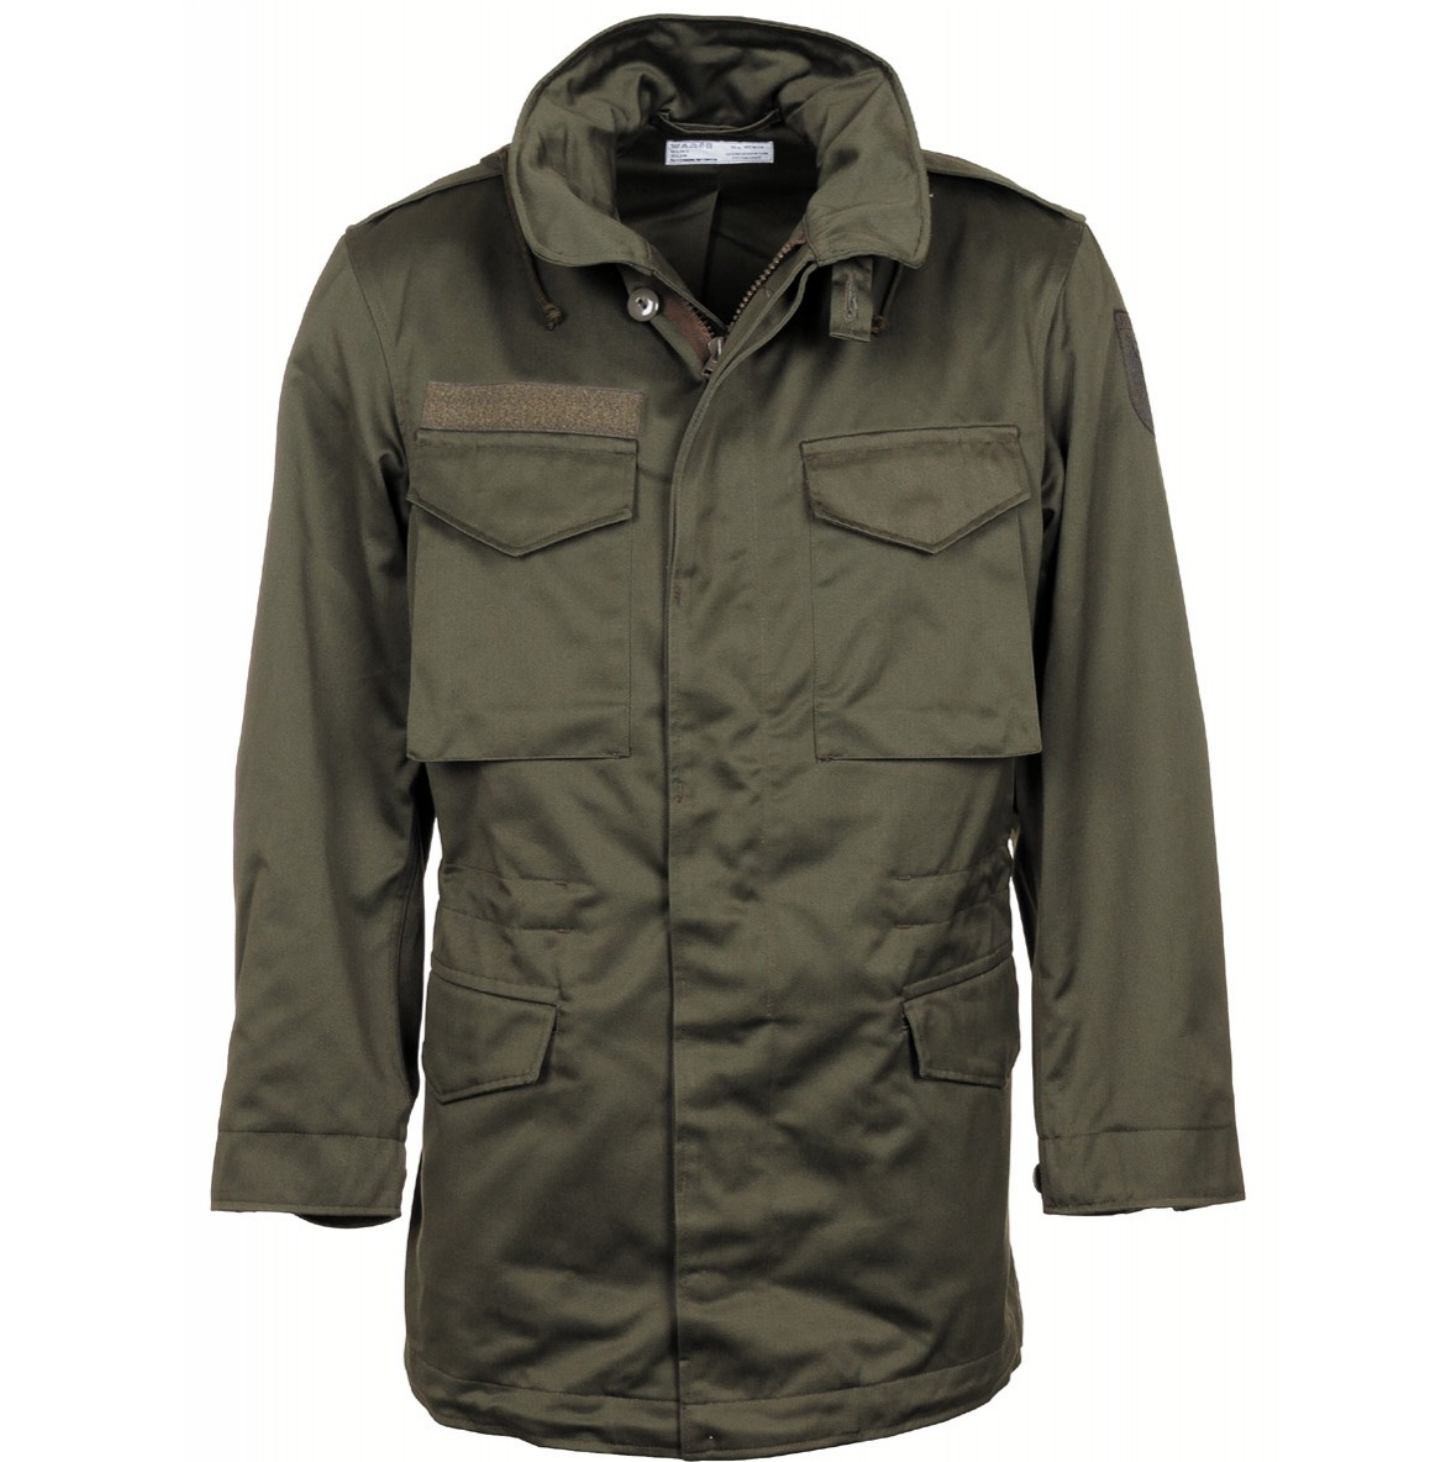 Cold Weather Field Jacket Liner, OD Green [Genuine Army Issue]